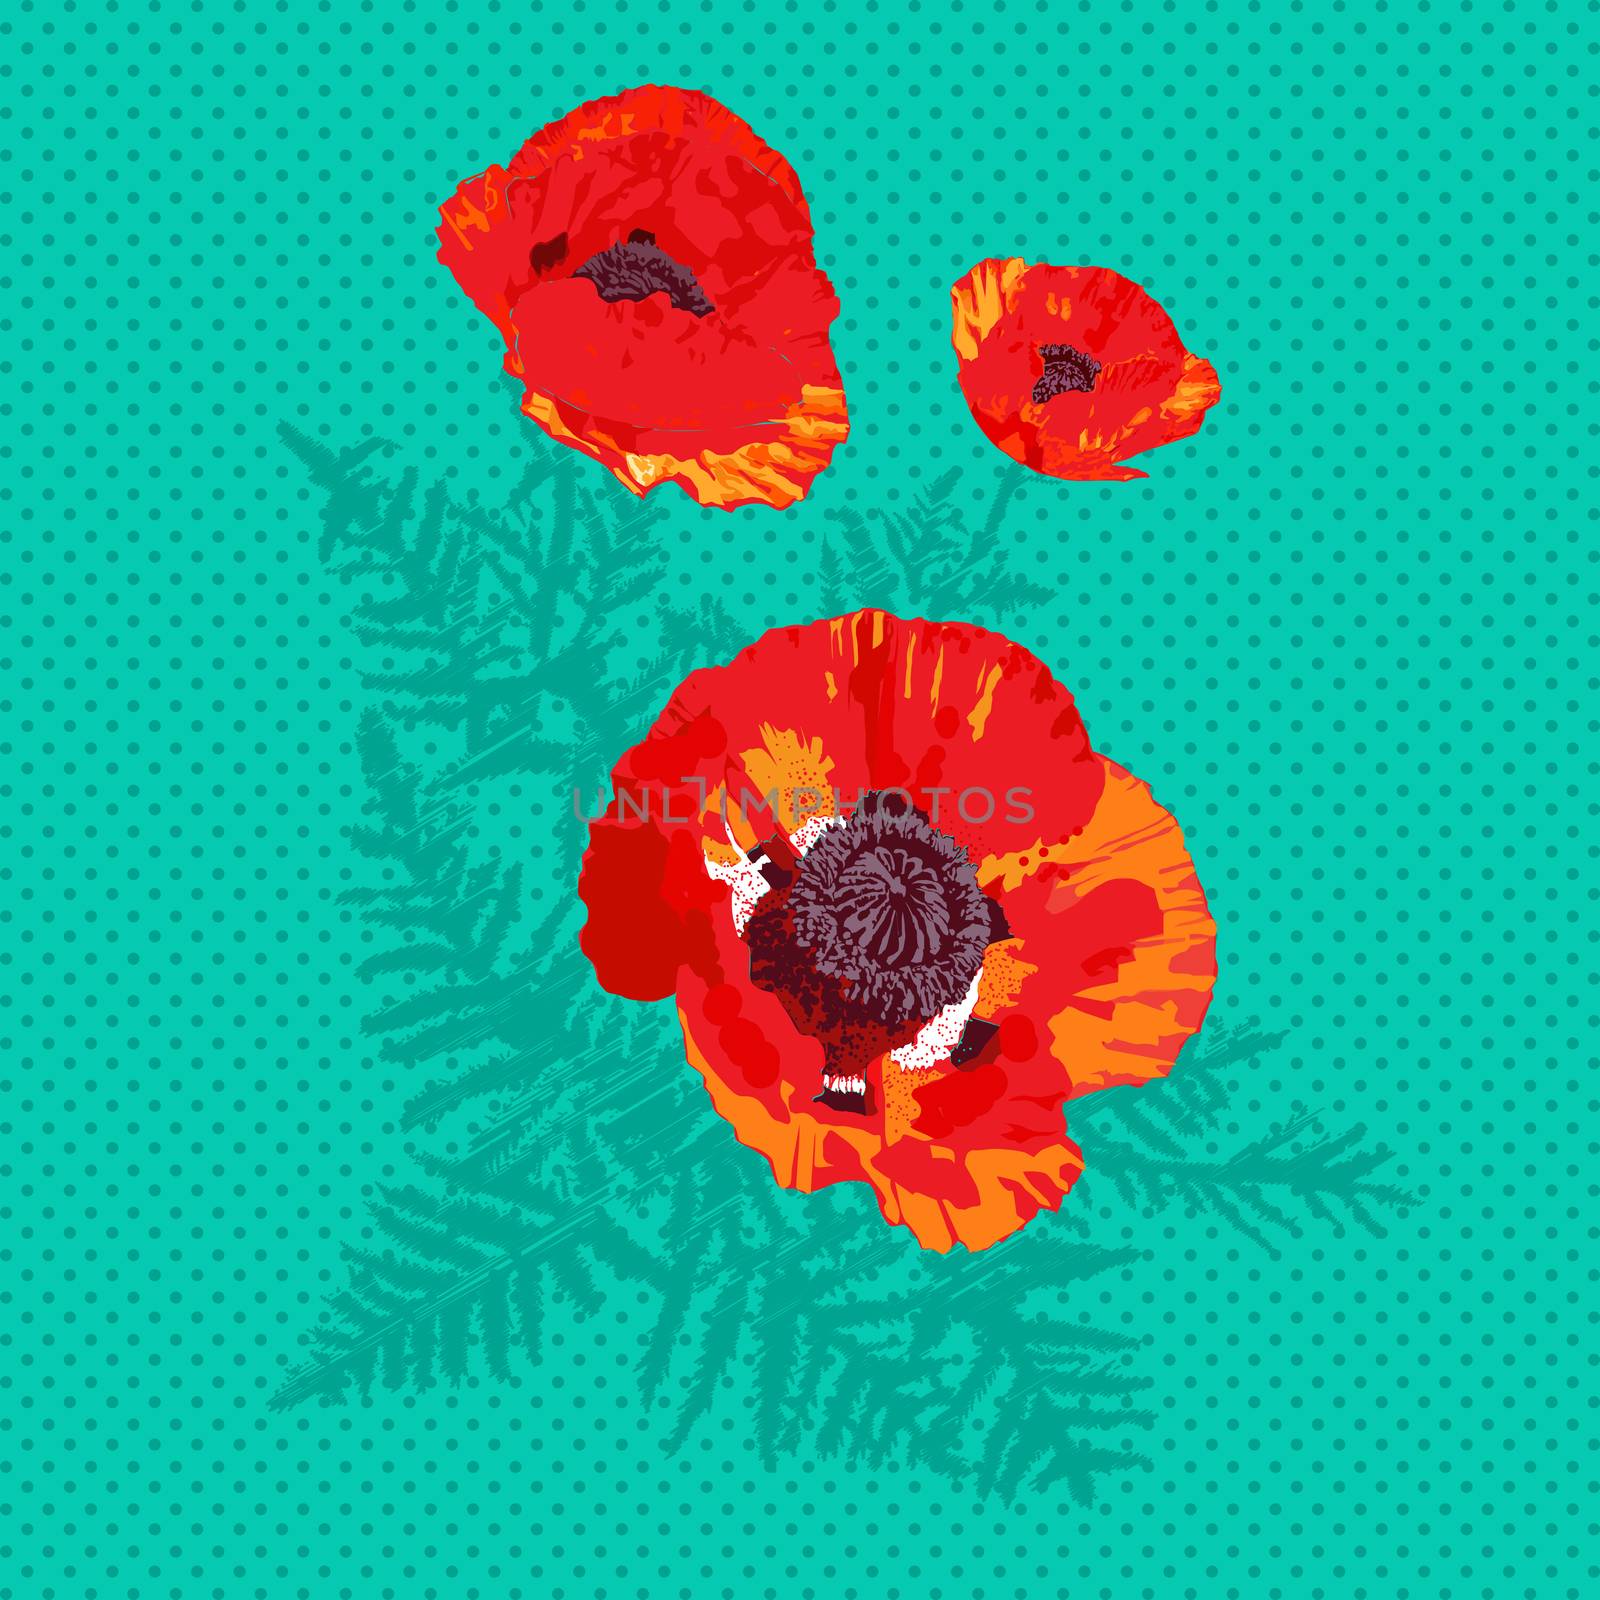 Pop Art card with poppies over a green background with dots